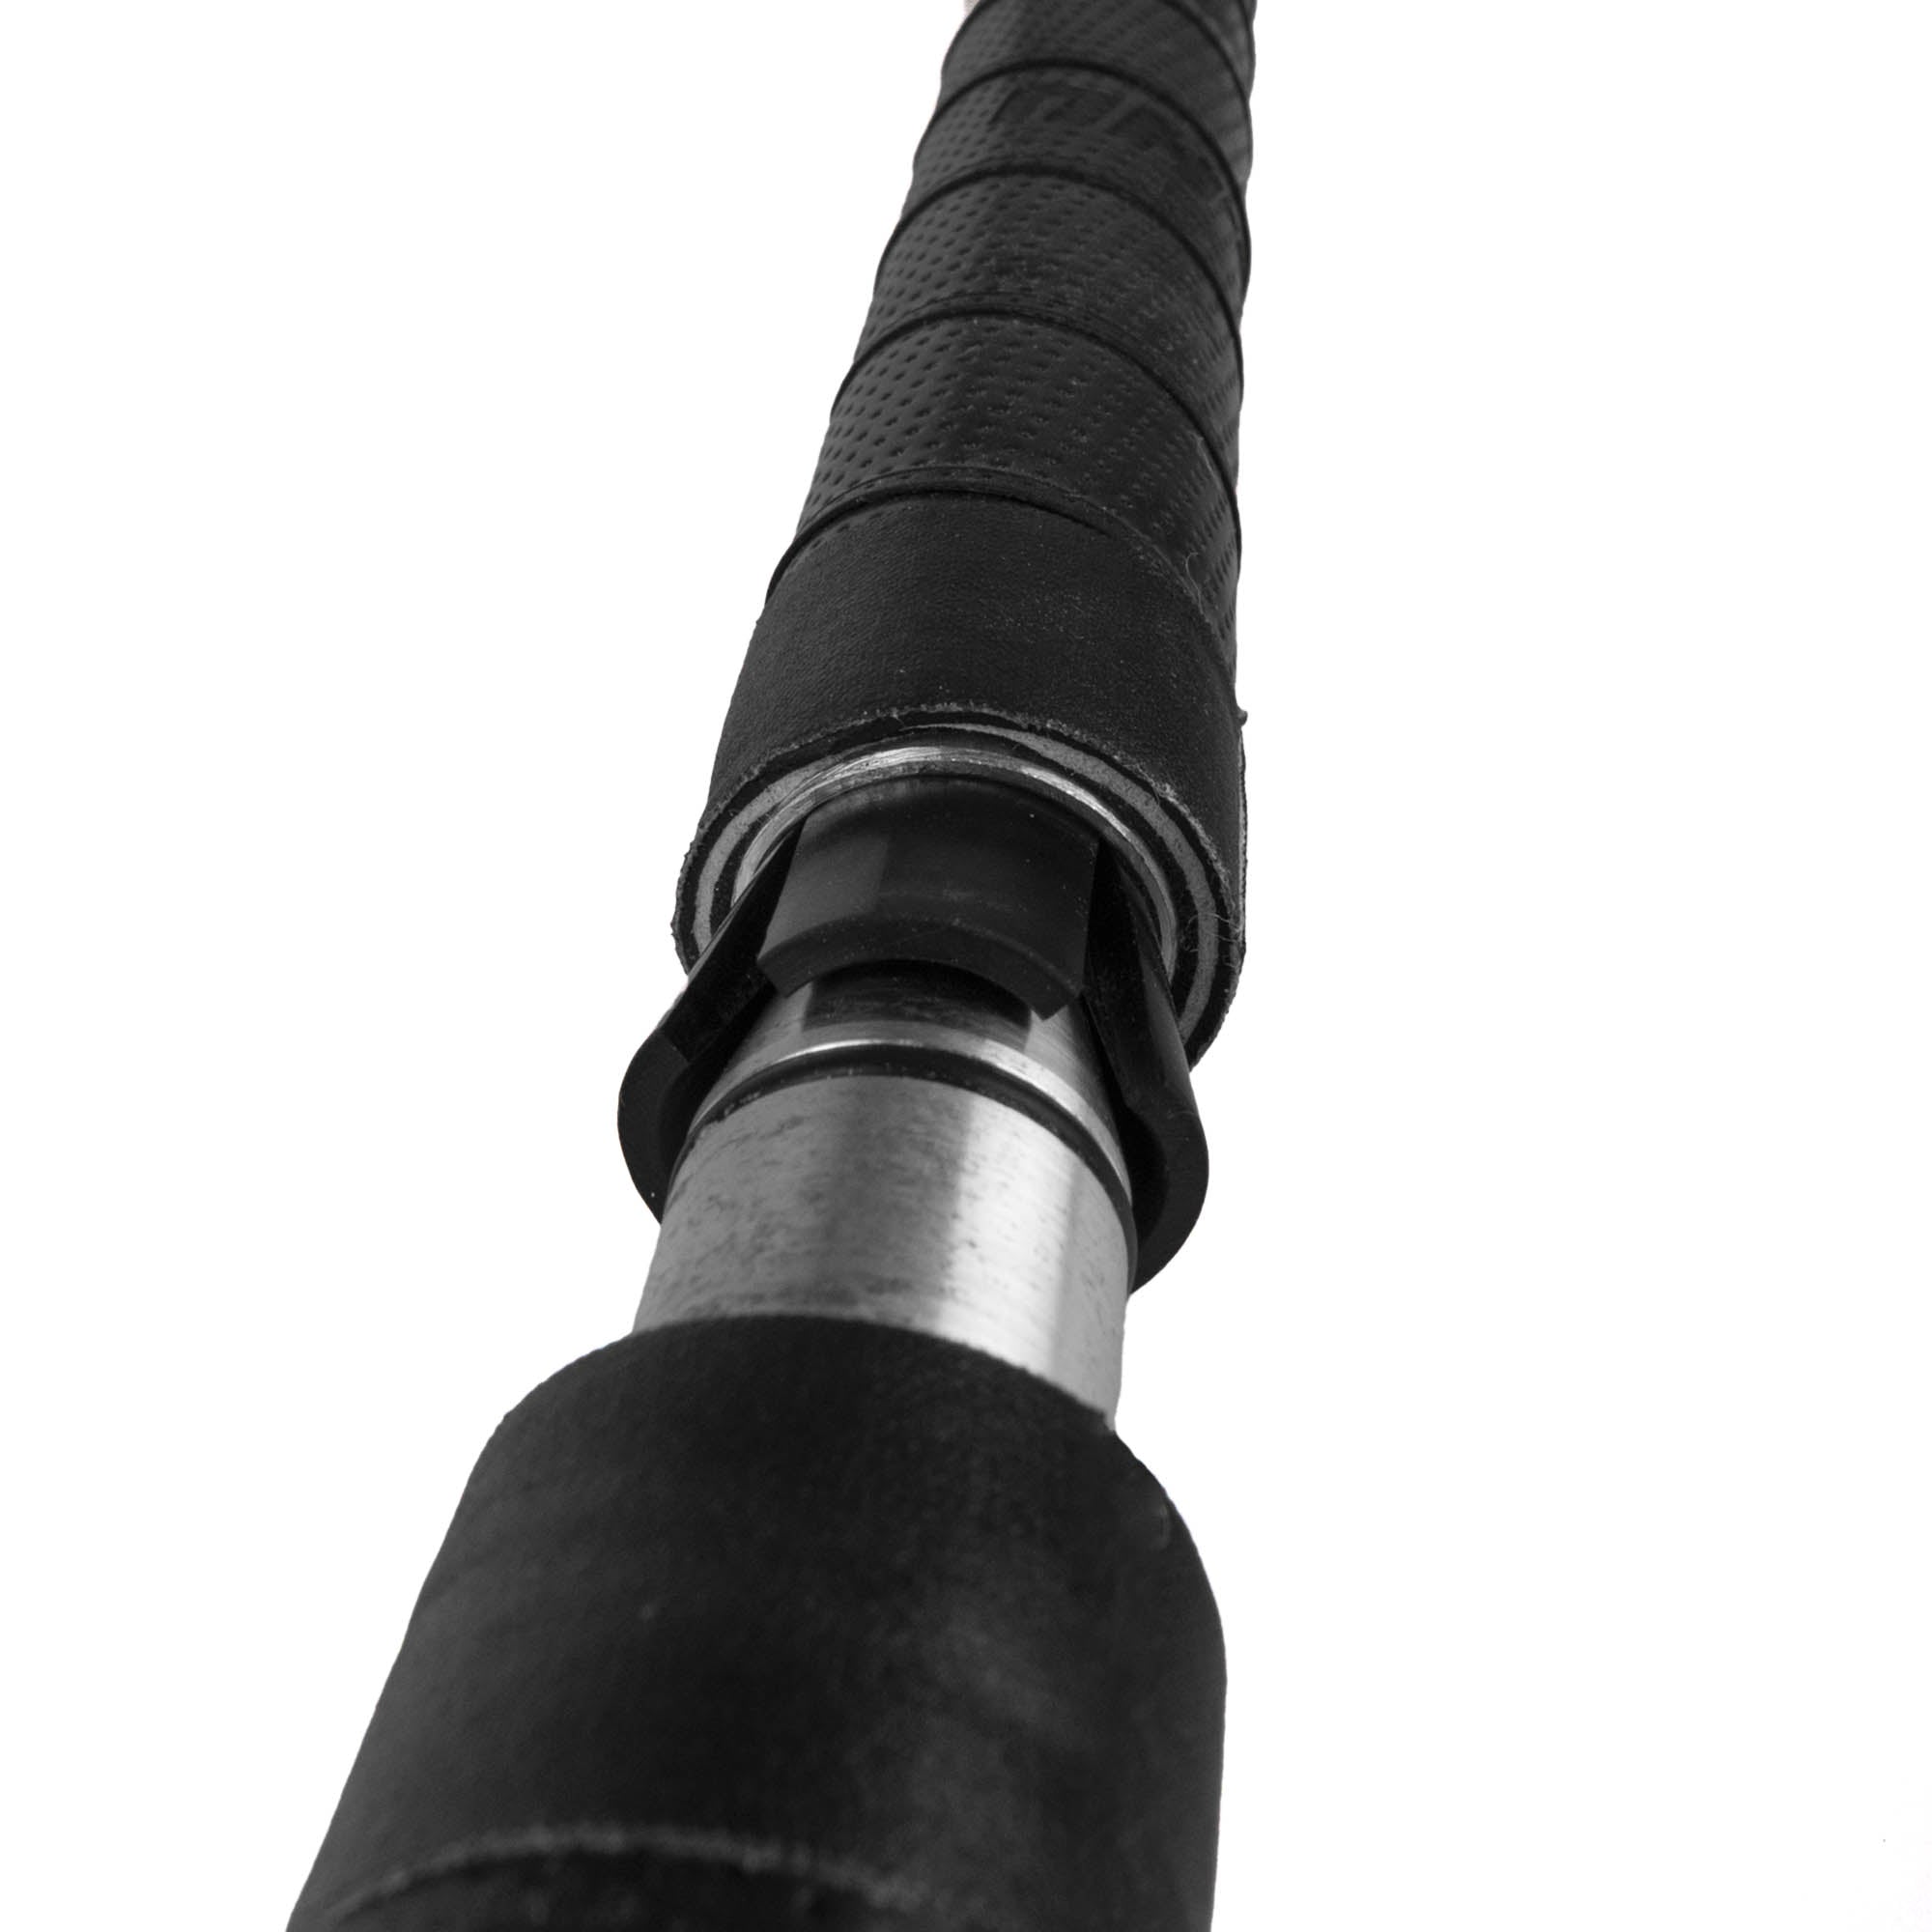 Close up of the staff attachment